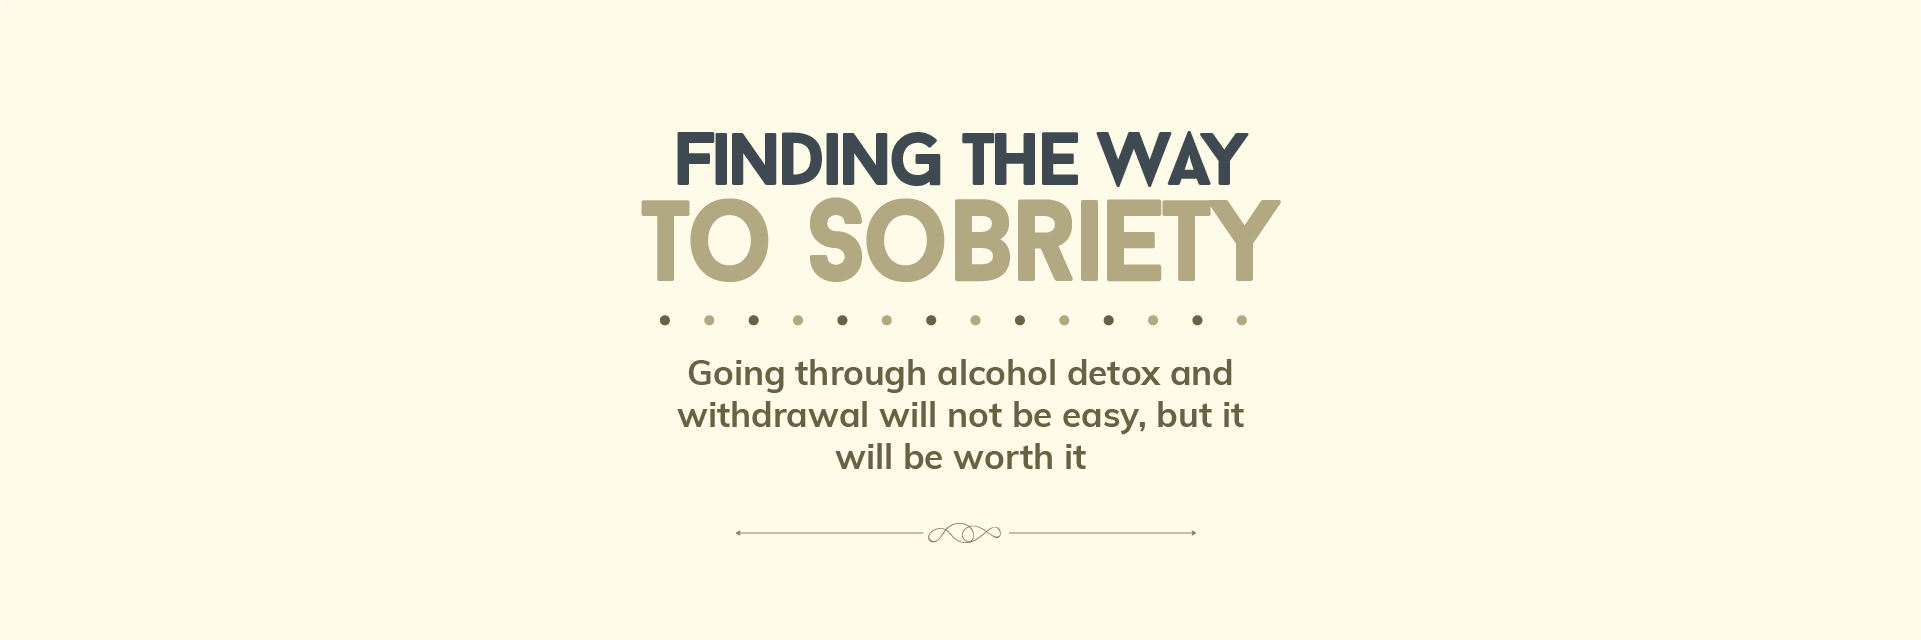 Going through alcohol detox and withdrawal will not be easy, but it will be worth it